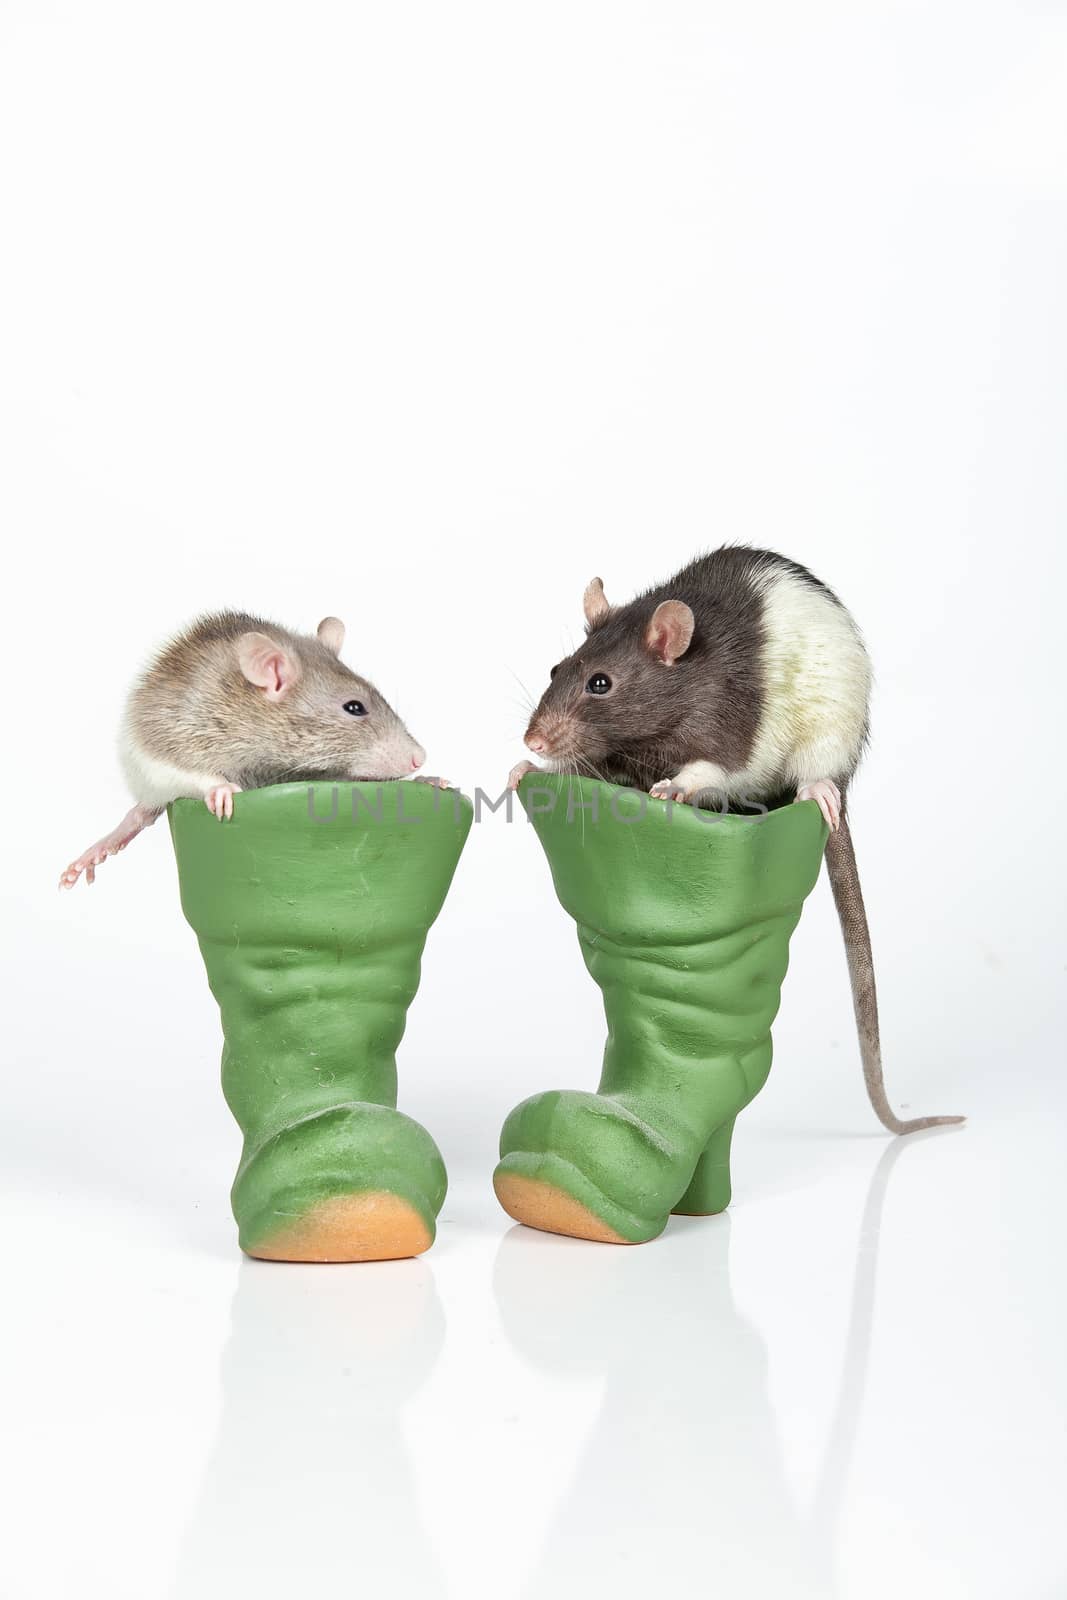 Rats And Boots by Fotoskat